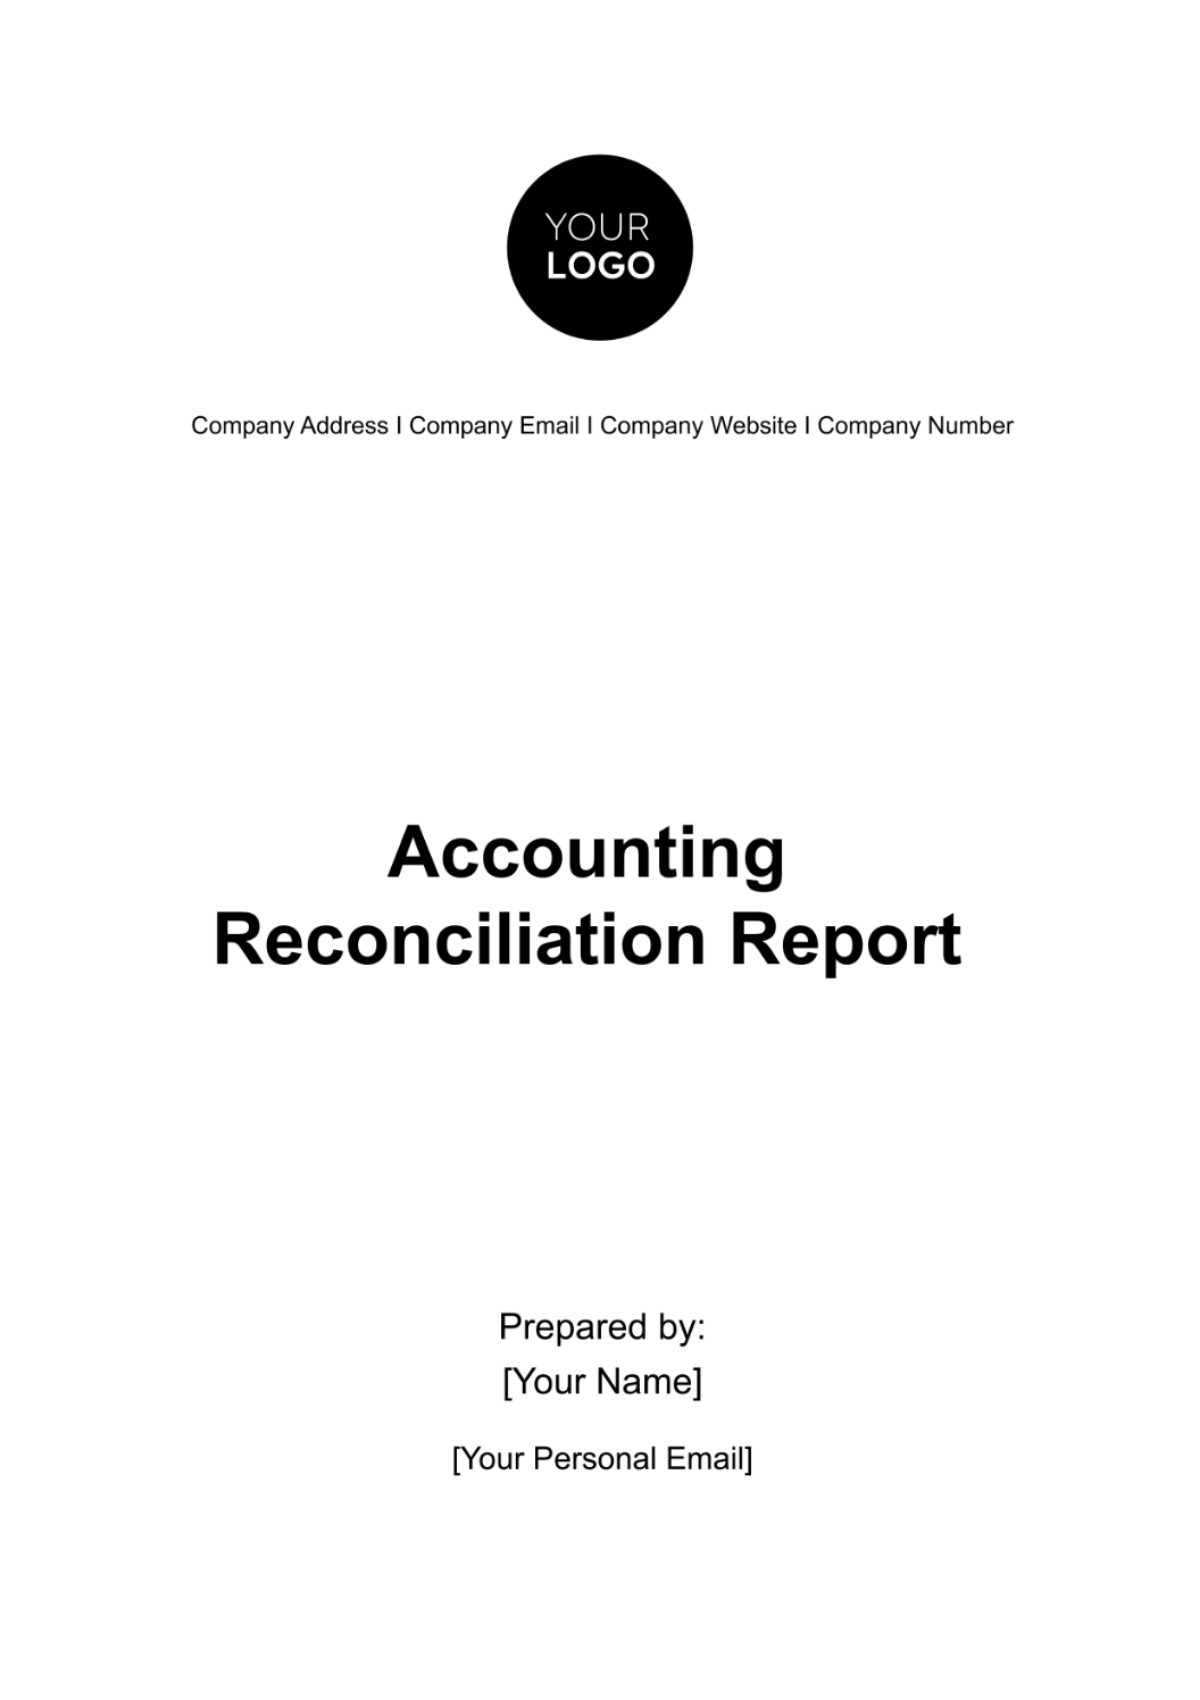 Accounting Reconciliation Report Template